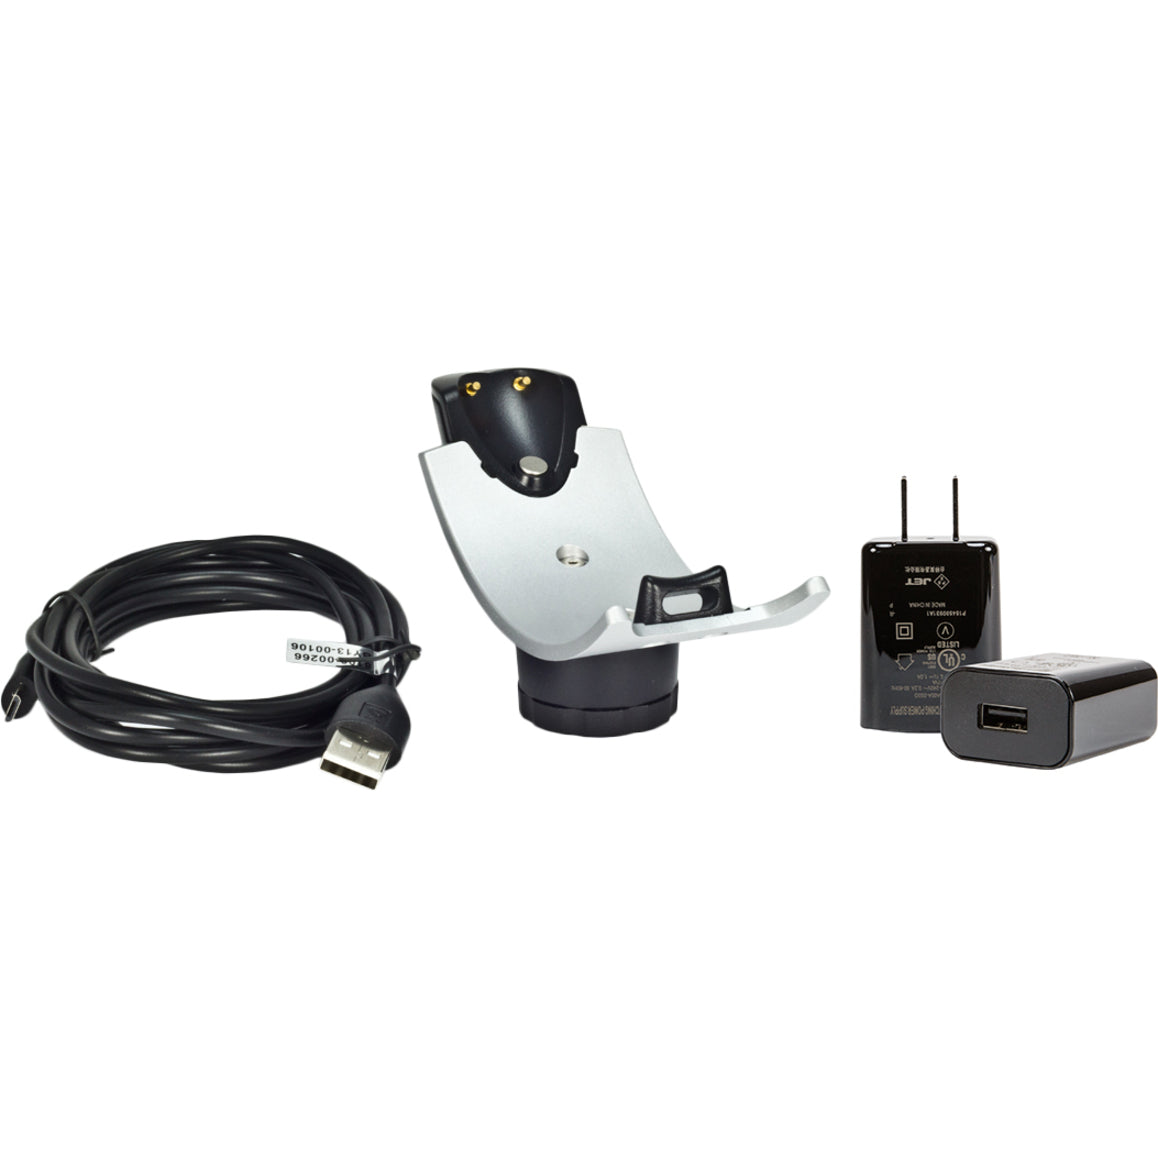 Socket Mobile AC4088-1657 Charging Mount "Only" for 7 & 700 Series Barcode Scanners, USB Cradle